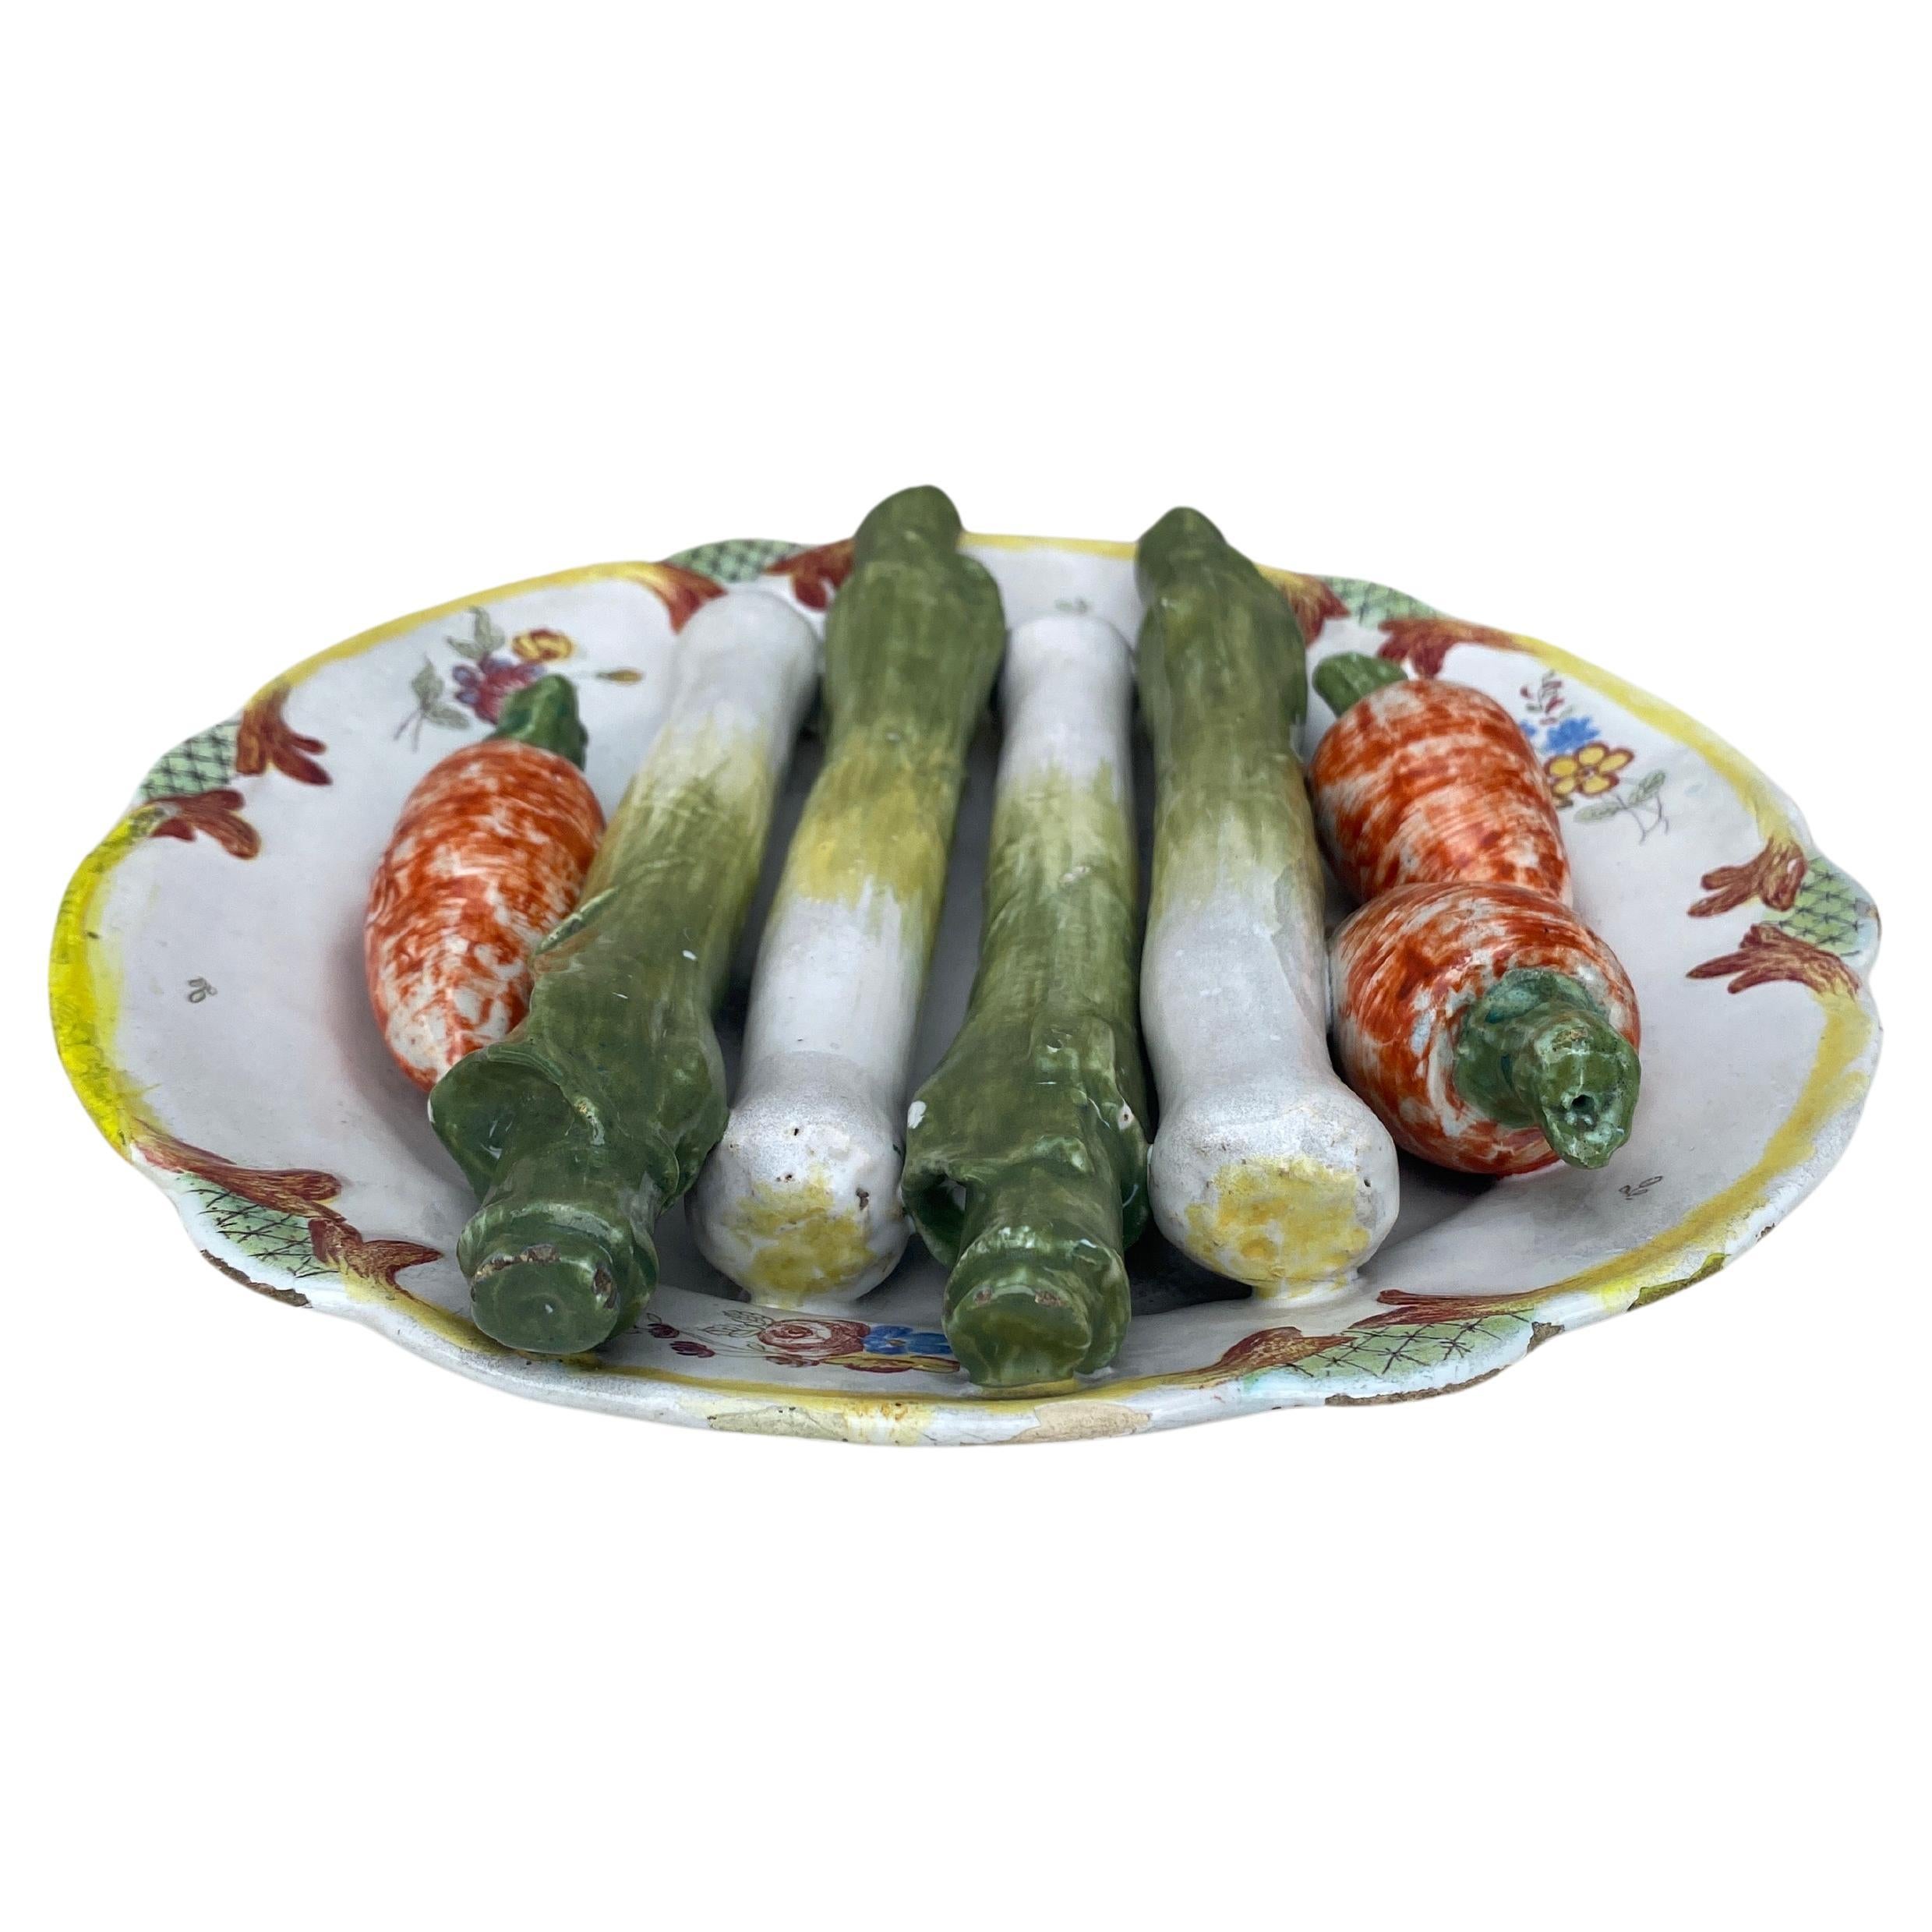 Majolica Faience Asparagus & Turnip Wall Platter Circa 1900.
Rustic faience , small chips as shown on the pictures.
 